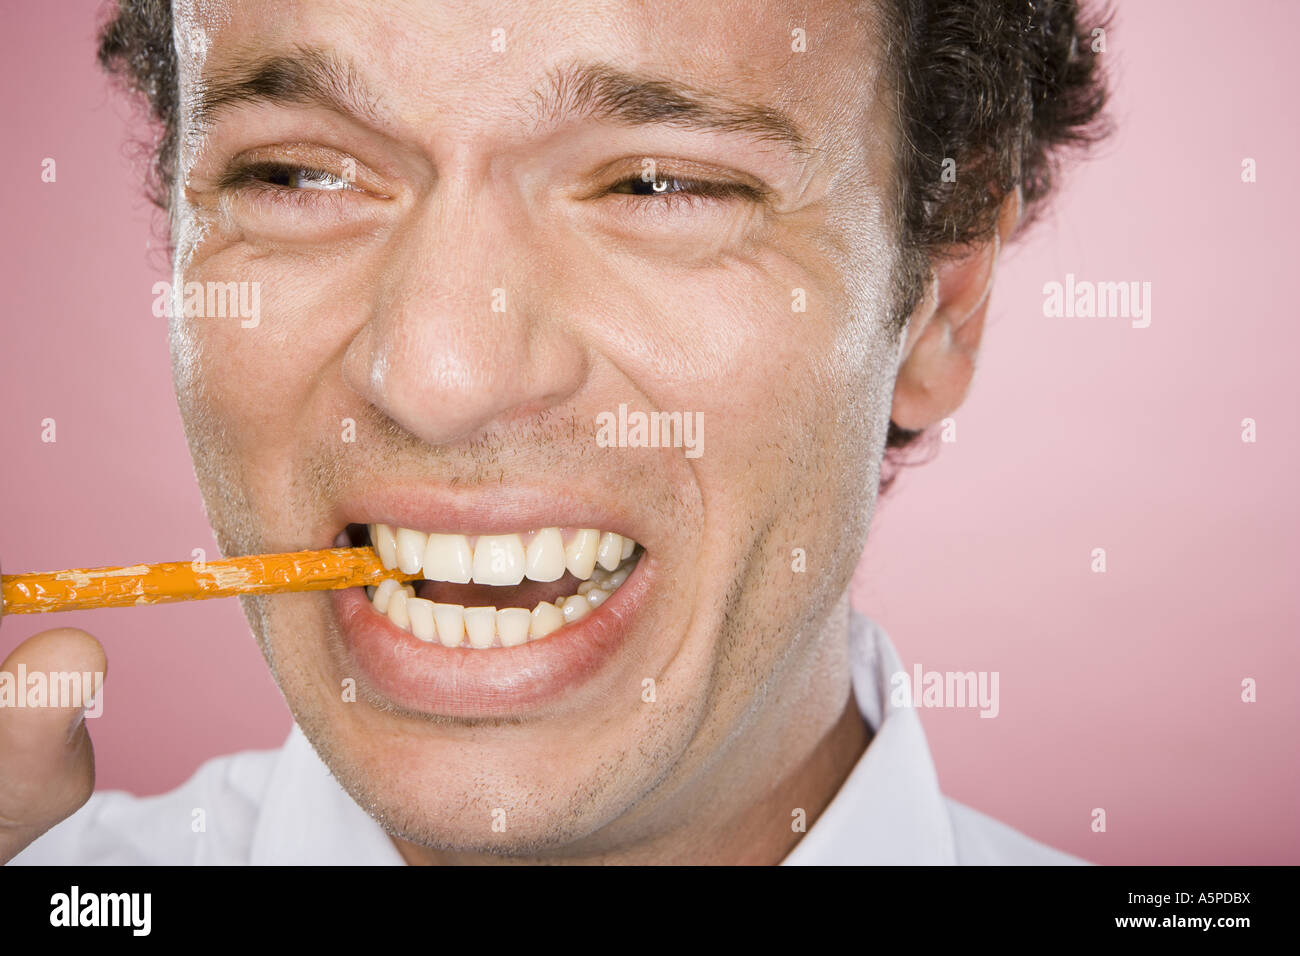 Close-up of a man biting the end of a pencil Stock Photo